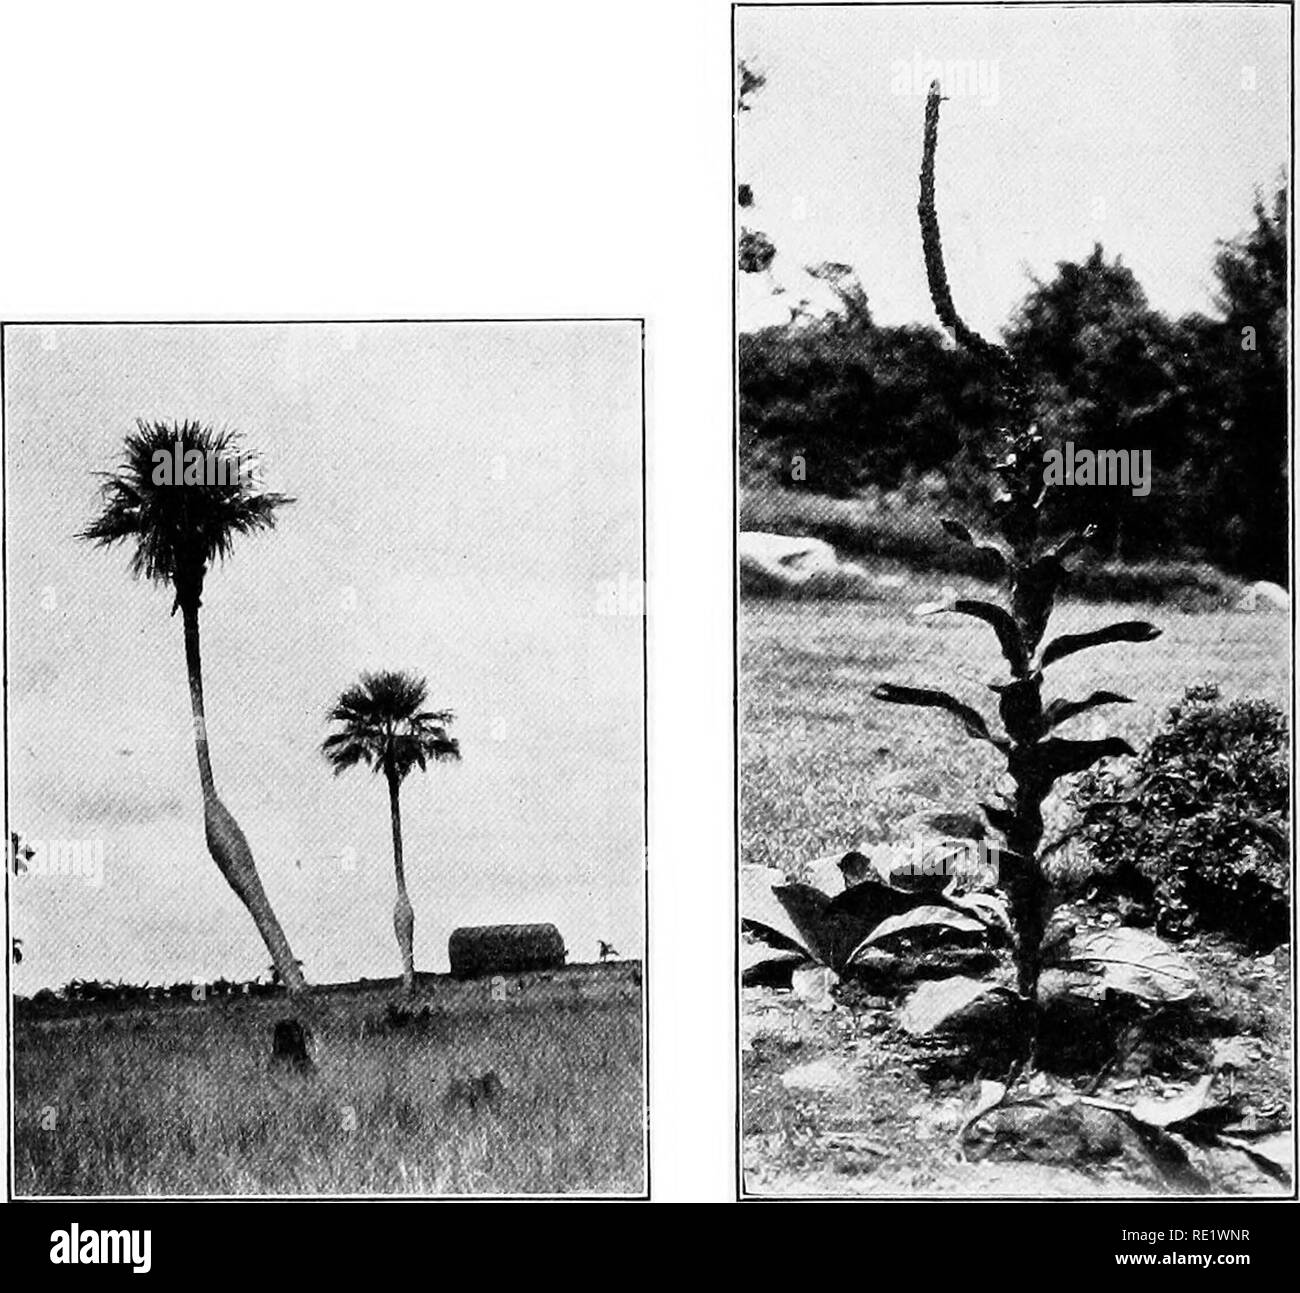 . Fundamentals of botany. Botany. 130 THE VEGETATIVE FUNCTIONS OF PLANTS tion between the curvature and the tip is parallel to the plumb-line. Examination of the ink-marks will show that the zone of curvature is the same as the zone of maximum. Fig. 87.—Positive geotropism in a barrigona palm {Colpotkrinax Wrightii). By some accident the palm, when younger, had been bent over. (Photo by the author.) Fig. 88.—Mullein {Verbascum thapsus) showing geotropic recov- ery of the terminal inflorescence, after having been bent over. growth in length. The stimulus of gravity has modified the distribution Stock Photo